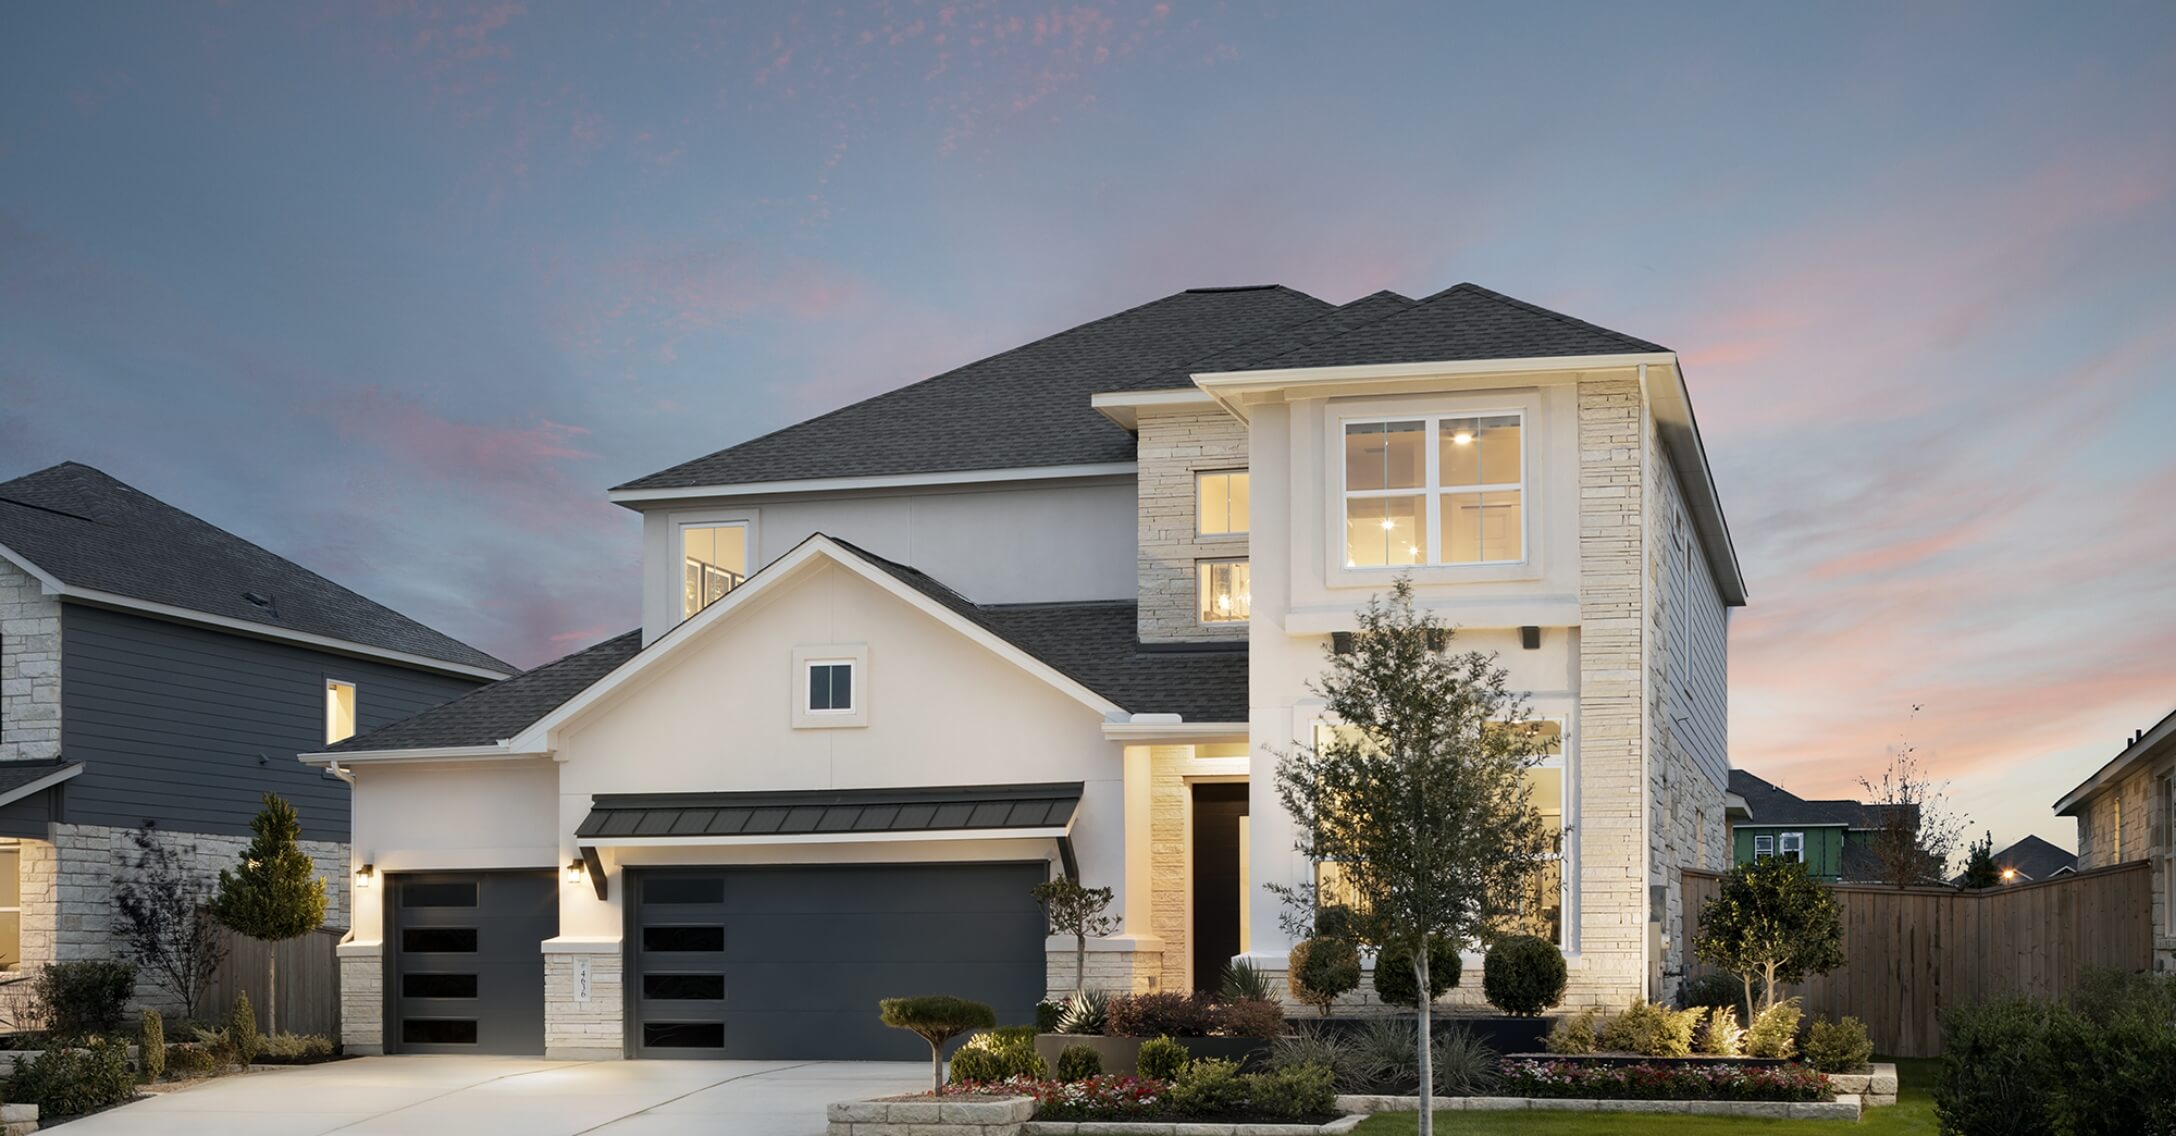 New homes in New Braunfels Texas with a garage and driveway at dusk.